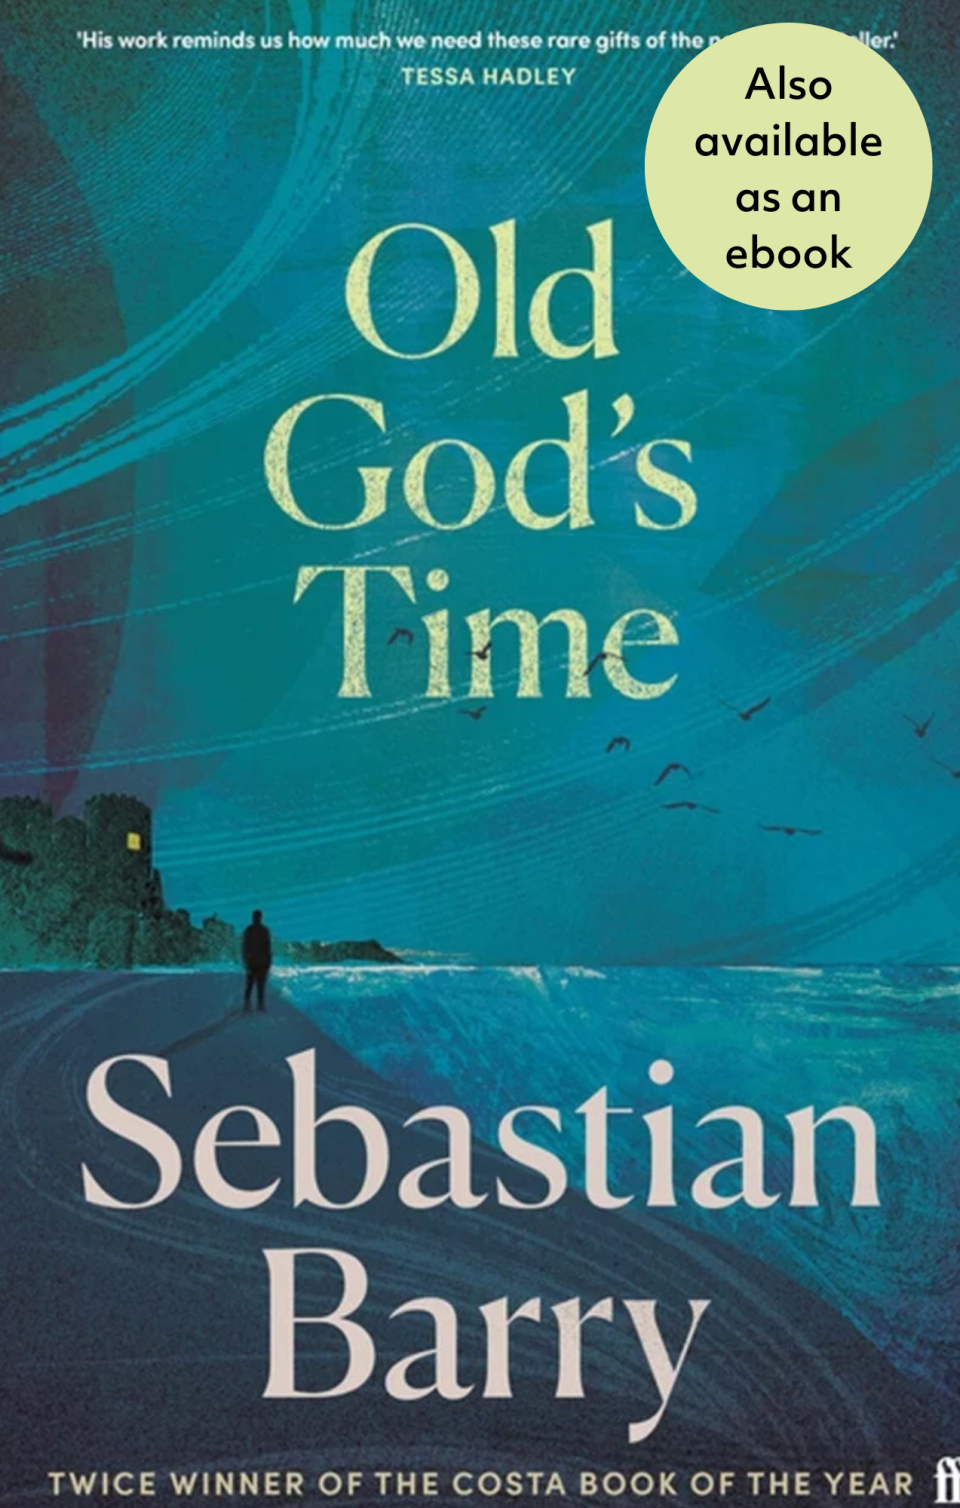 Cover of Old God's Time by Sebastian Barry